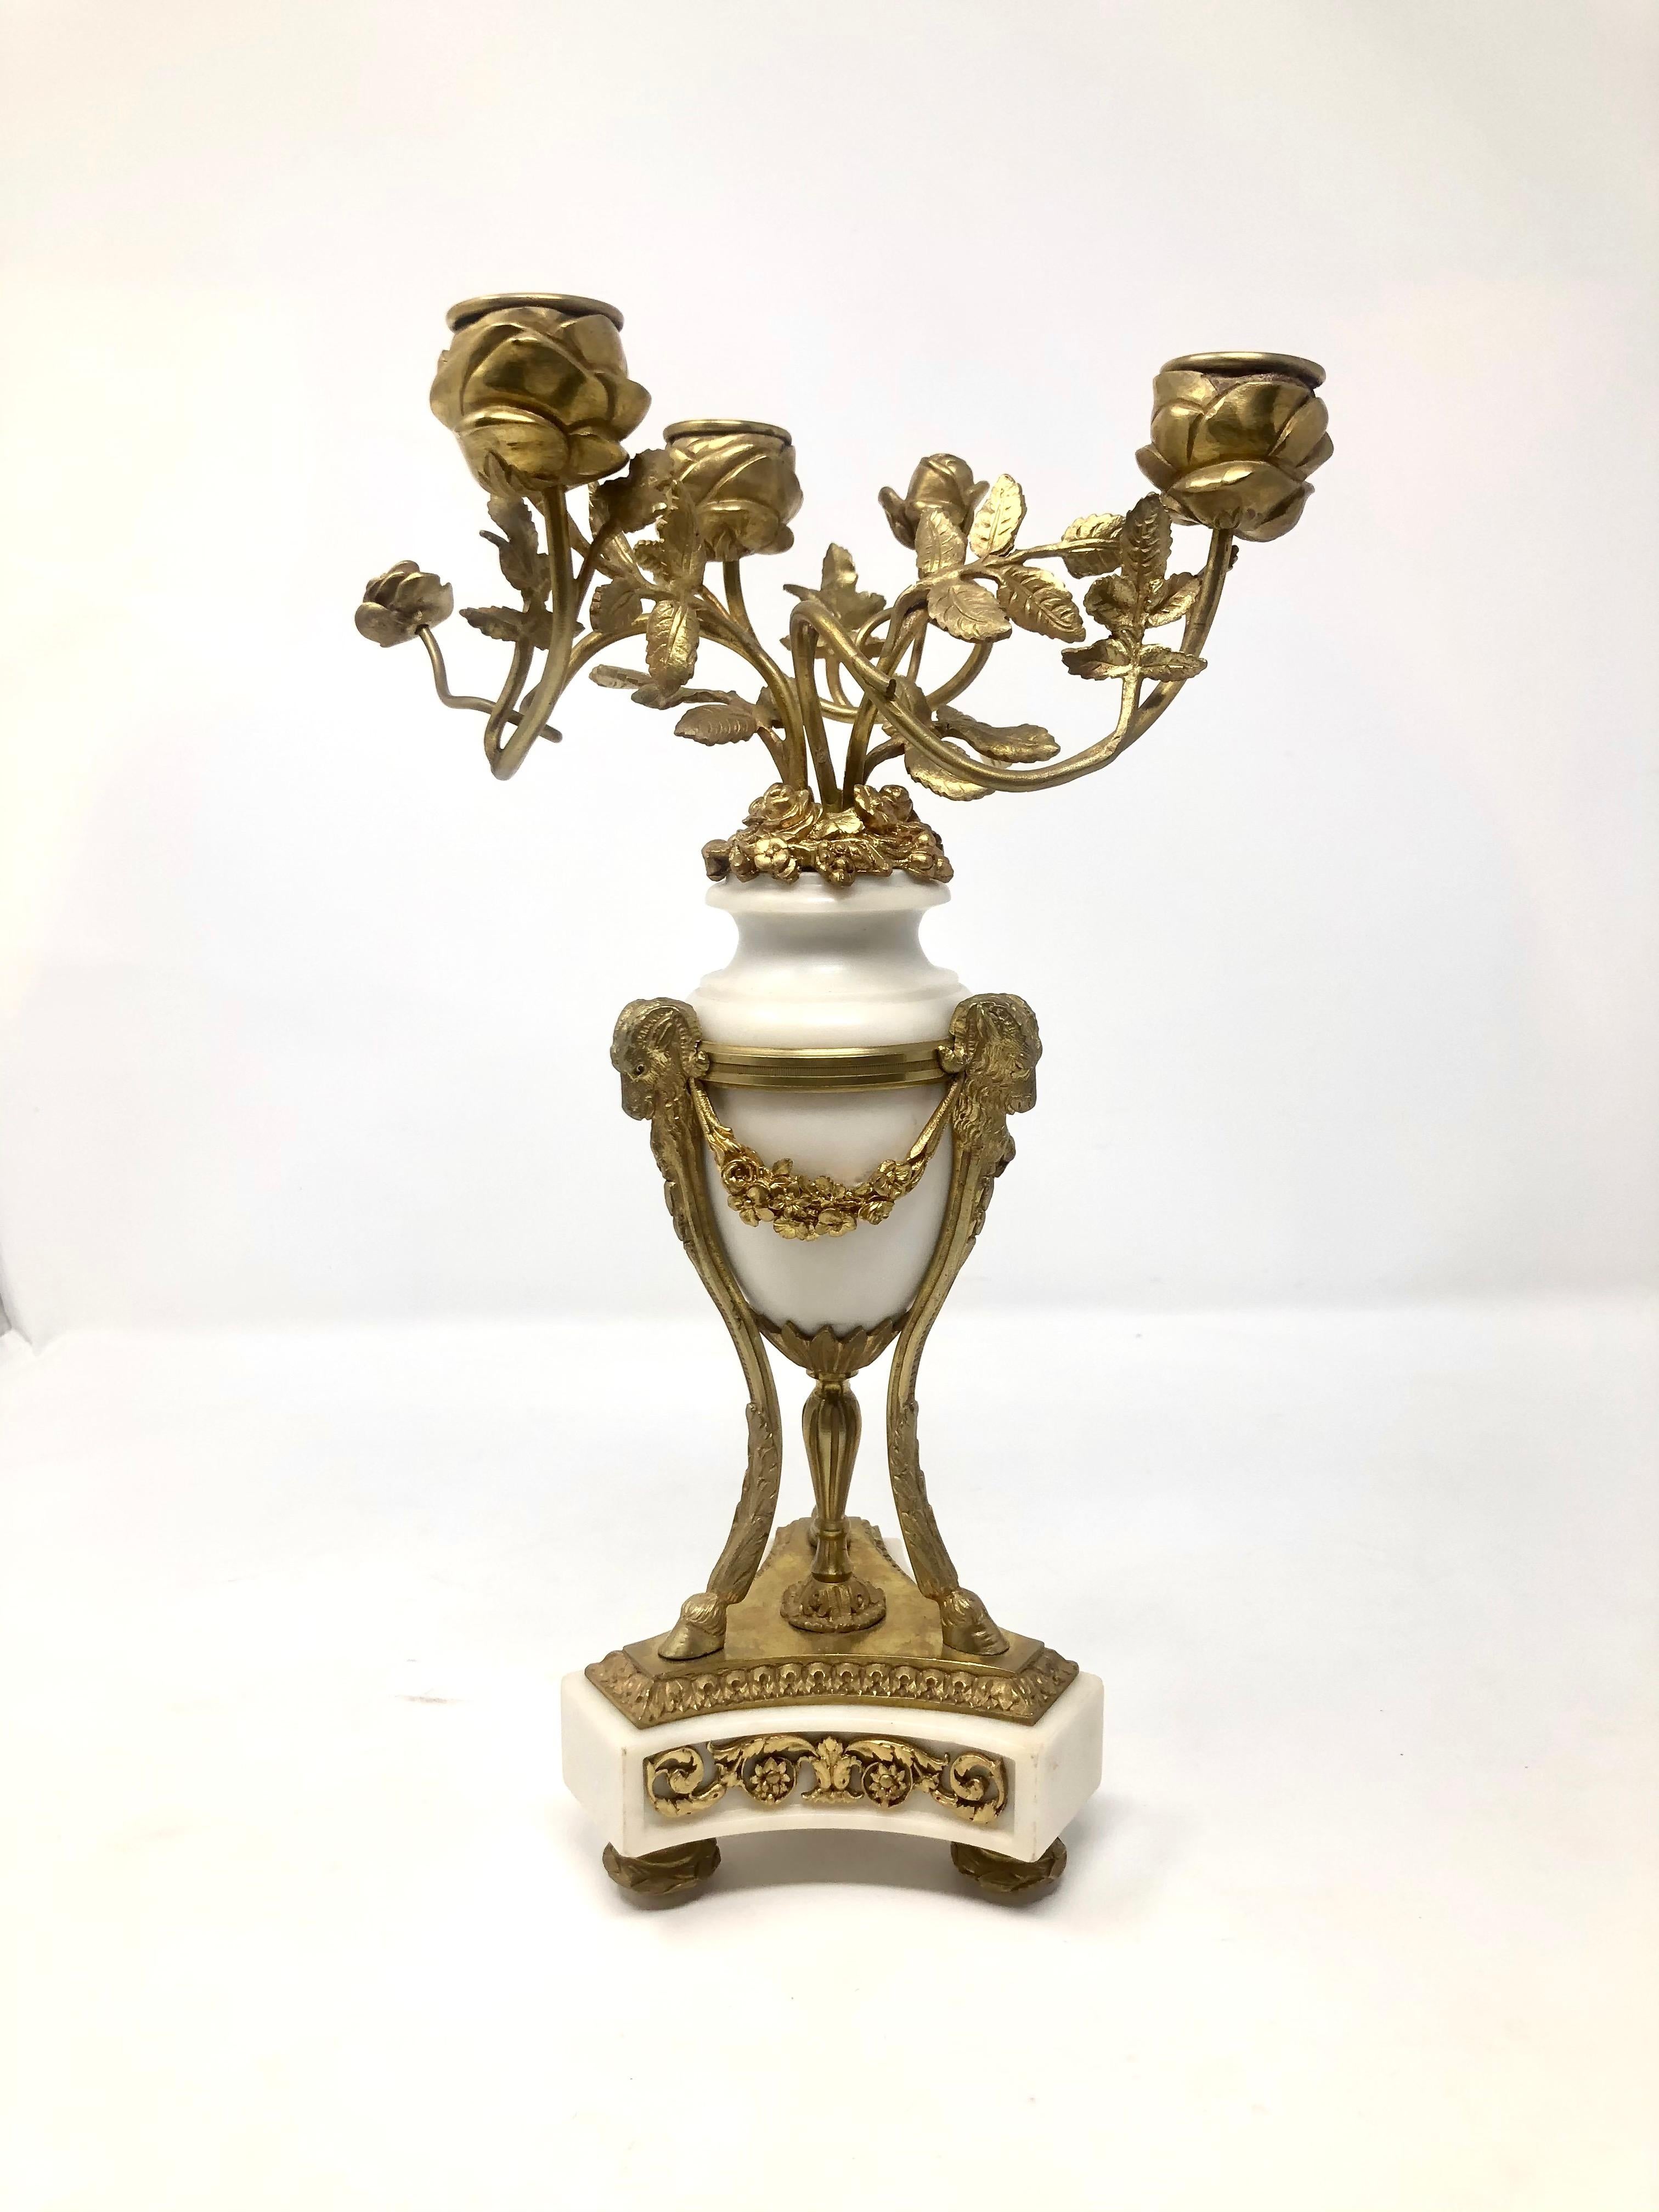 Pair of antique French marble and gold bronze candelabra with ram's heads, floral and wreath details, Circa 1860-1870.